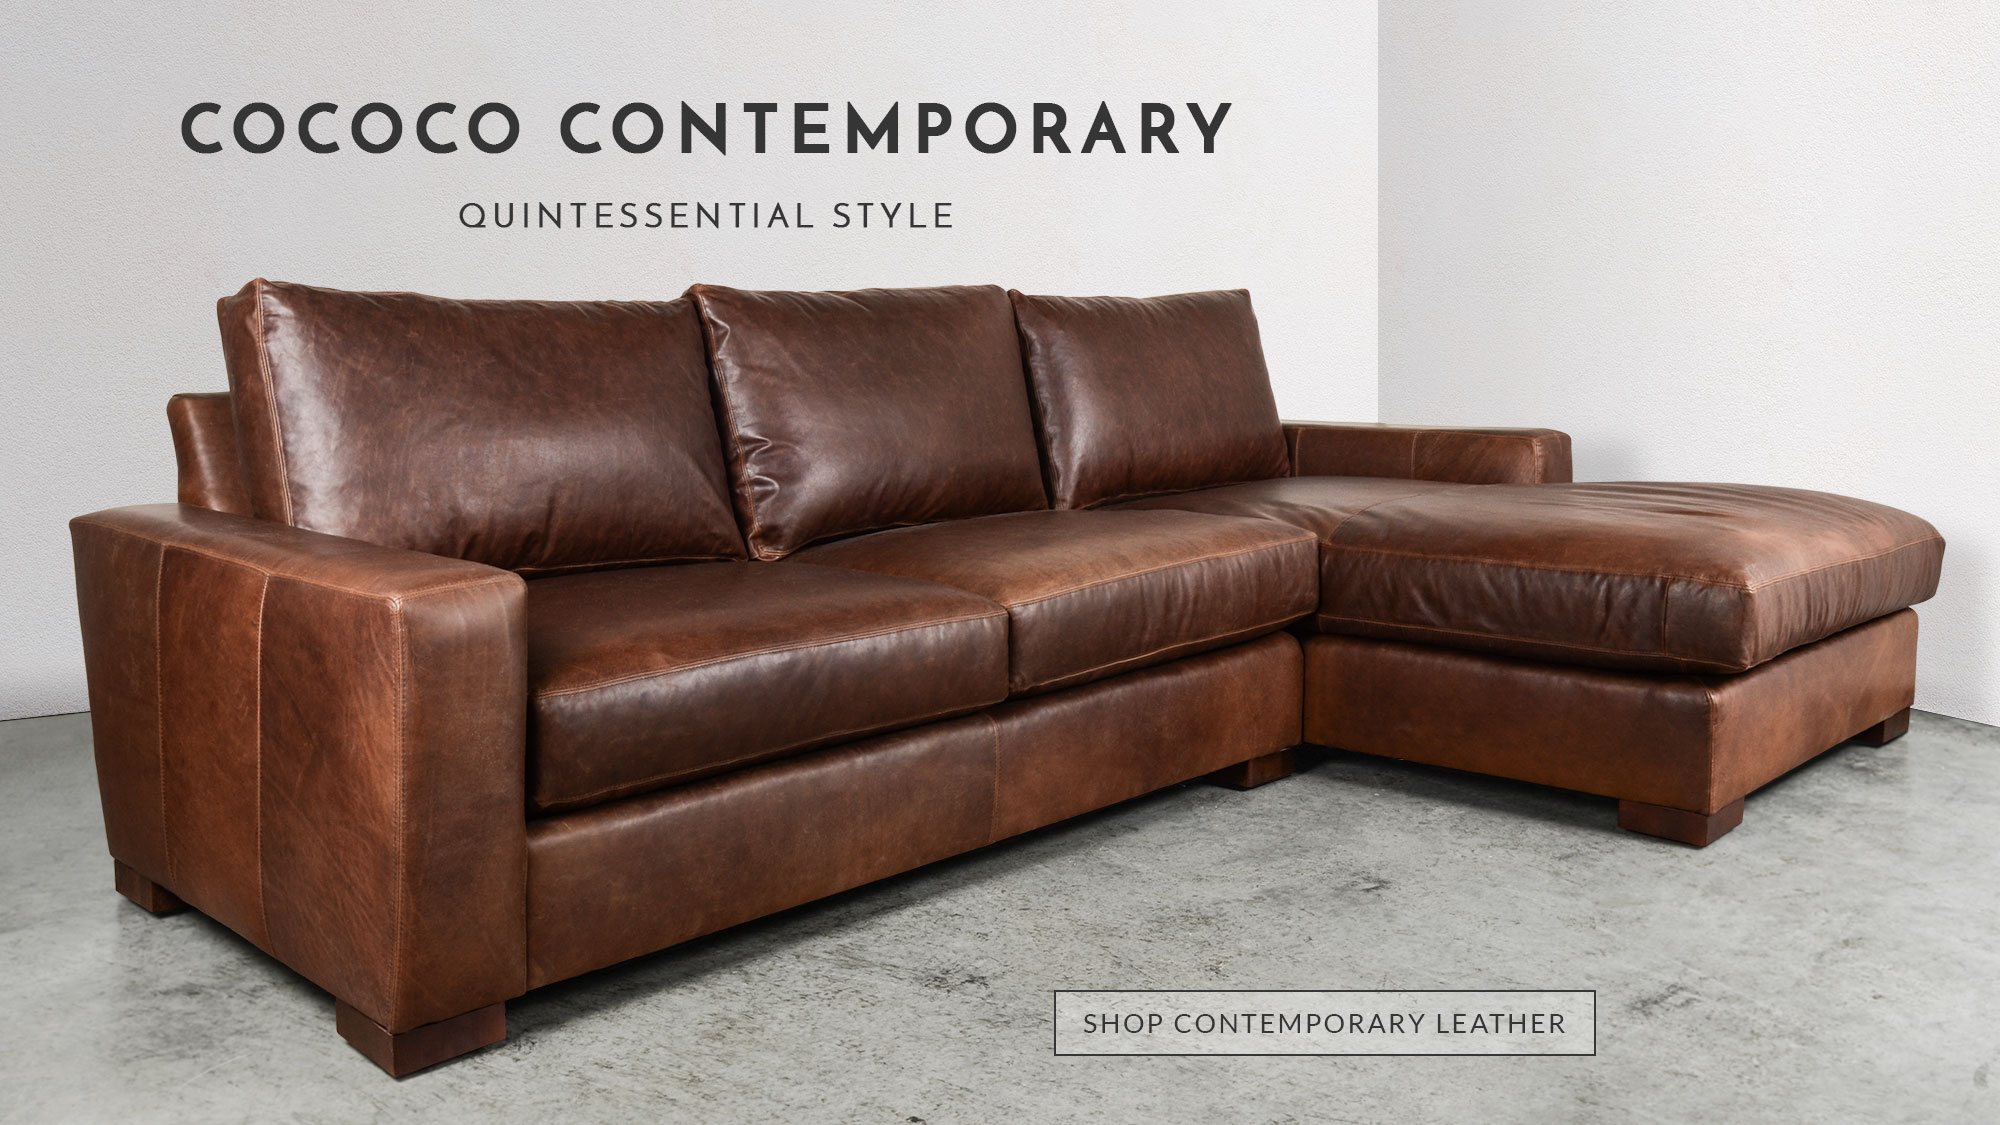 COCOCO Home provides a unique shopping experience when compared to high-end  furniture stores, offering custom leather or fabric furniture.